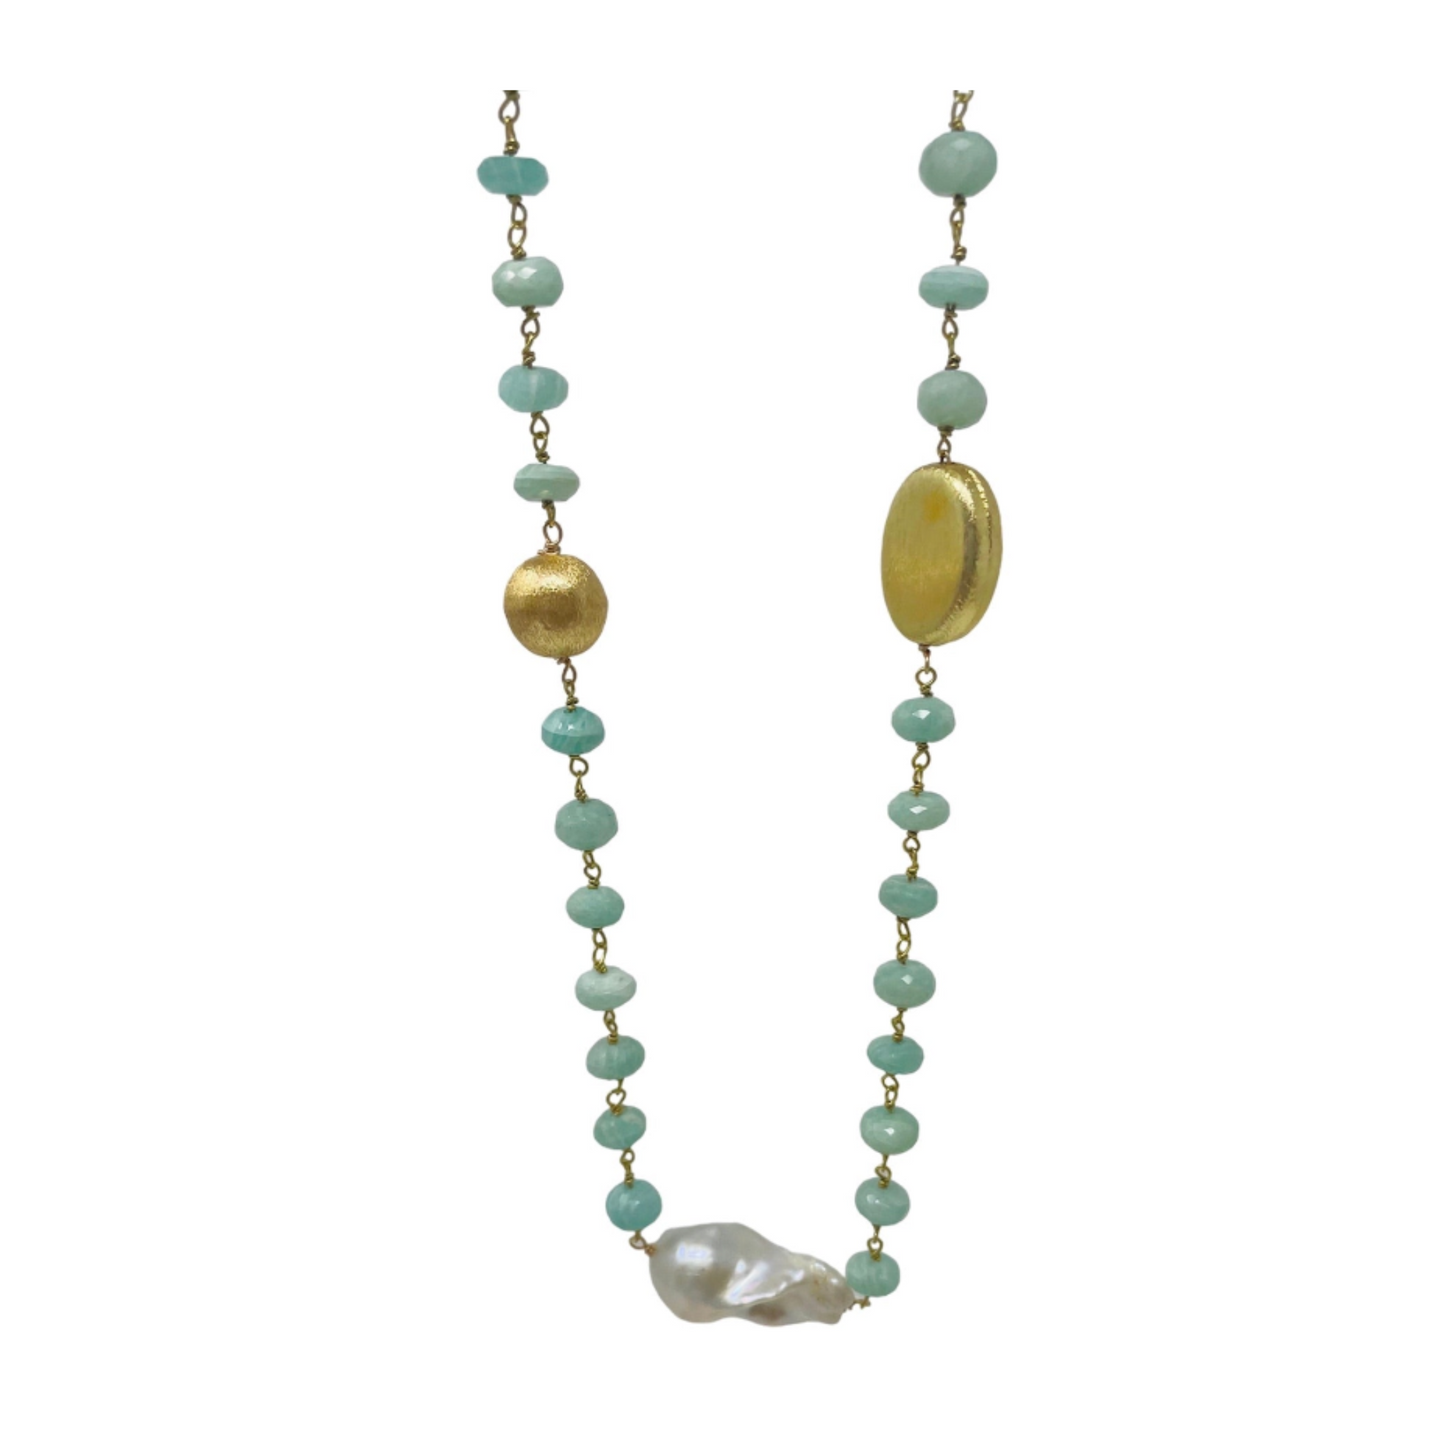 Aqua Beads with Pearl and Gold Beads Necklace